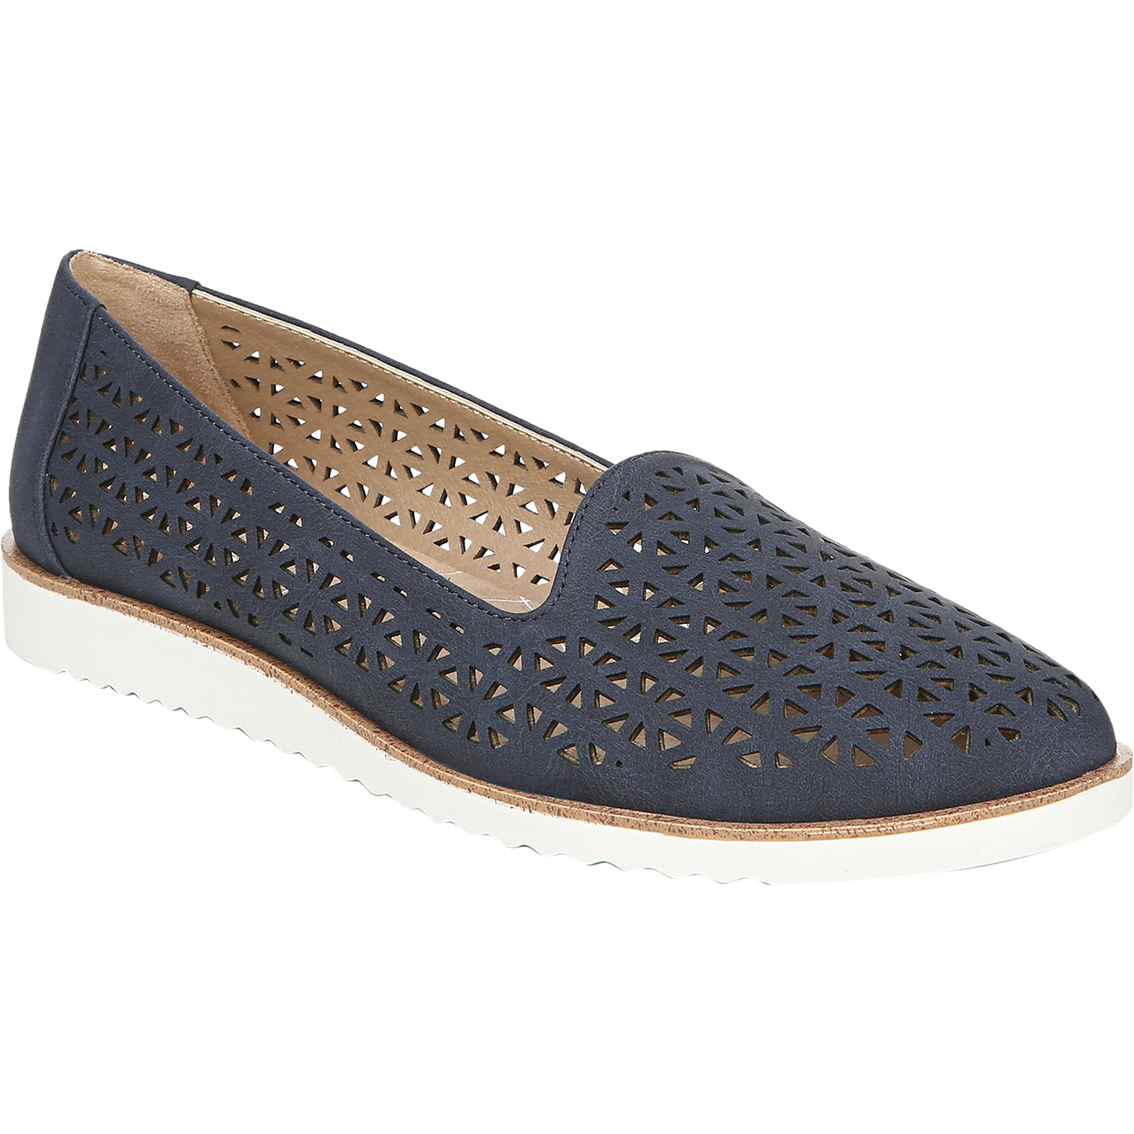 Lifestride Zamora Perforated Flat Shoes | Flats | Shoes | Shop The Exchange